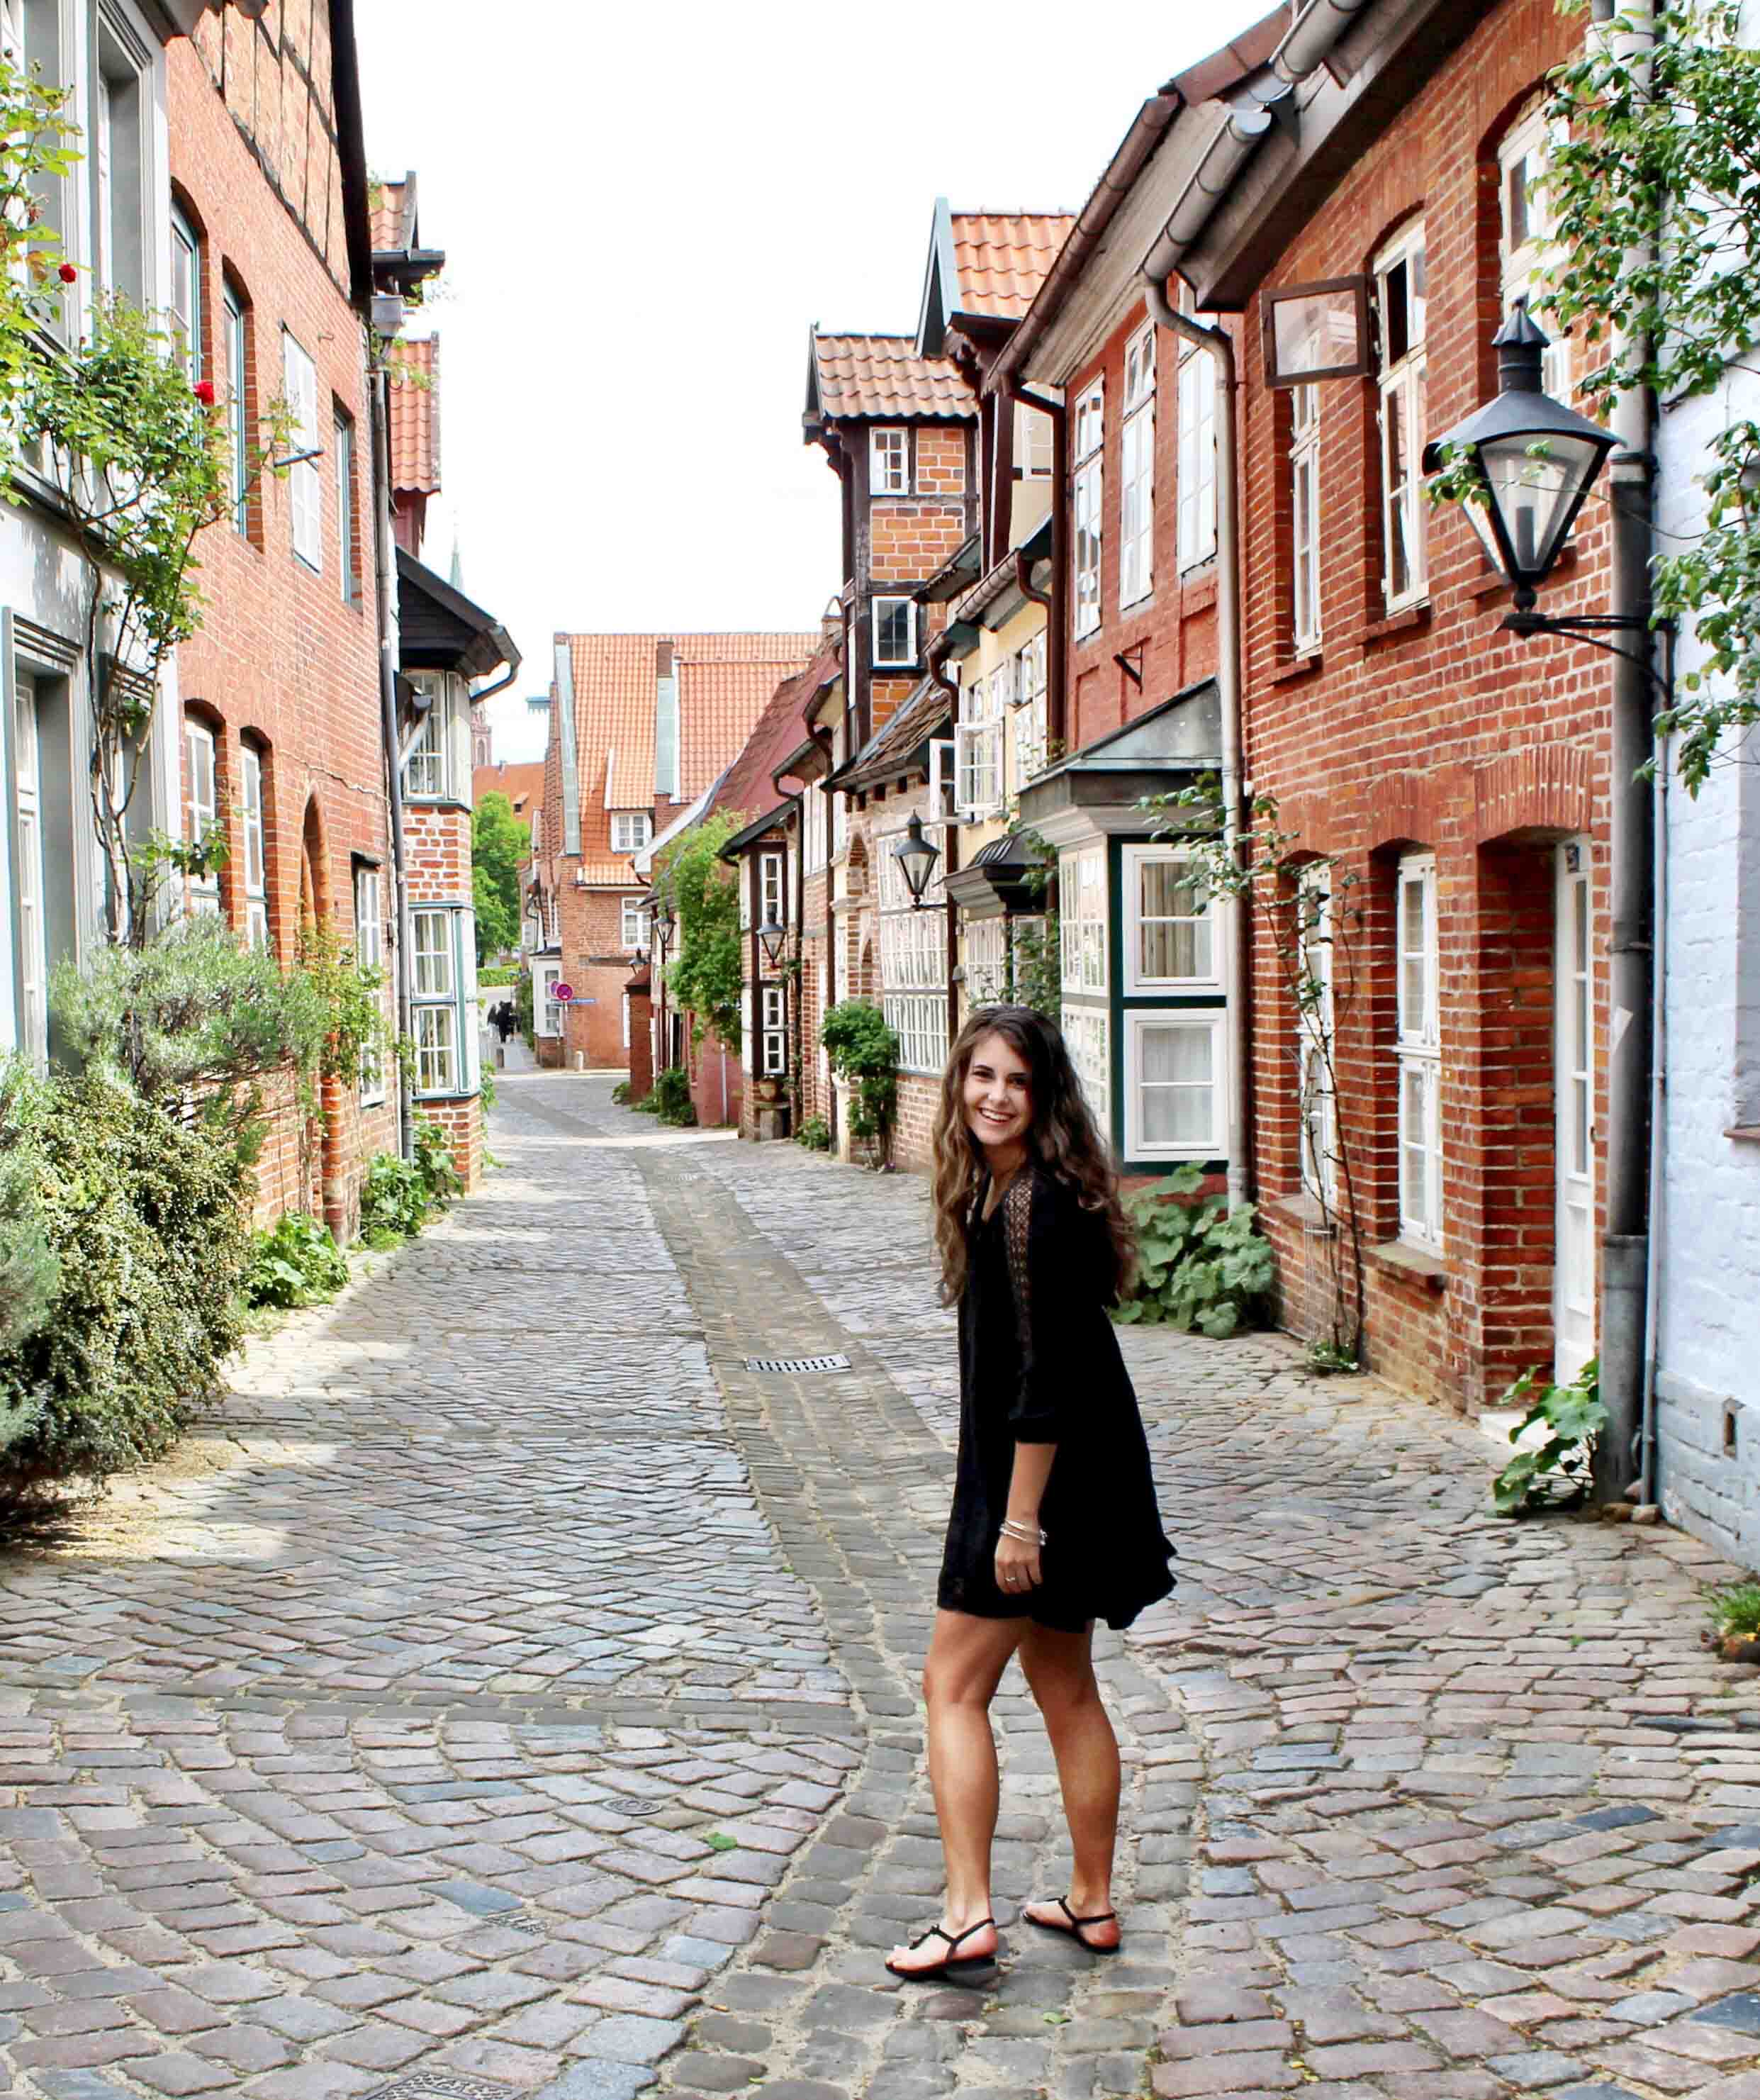 Student walking the historic streets in Lüneburg, Germany.